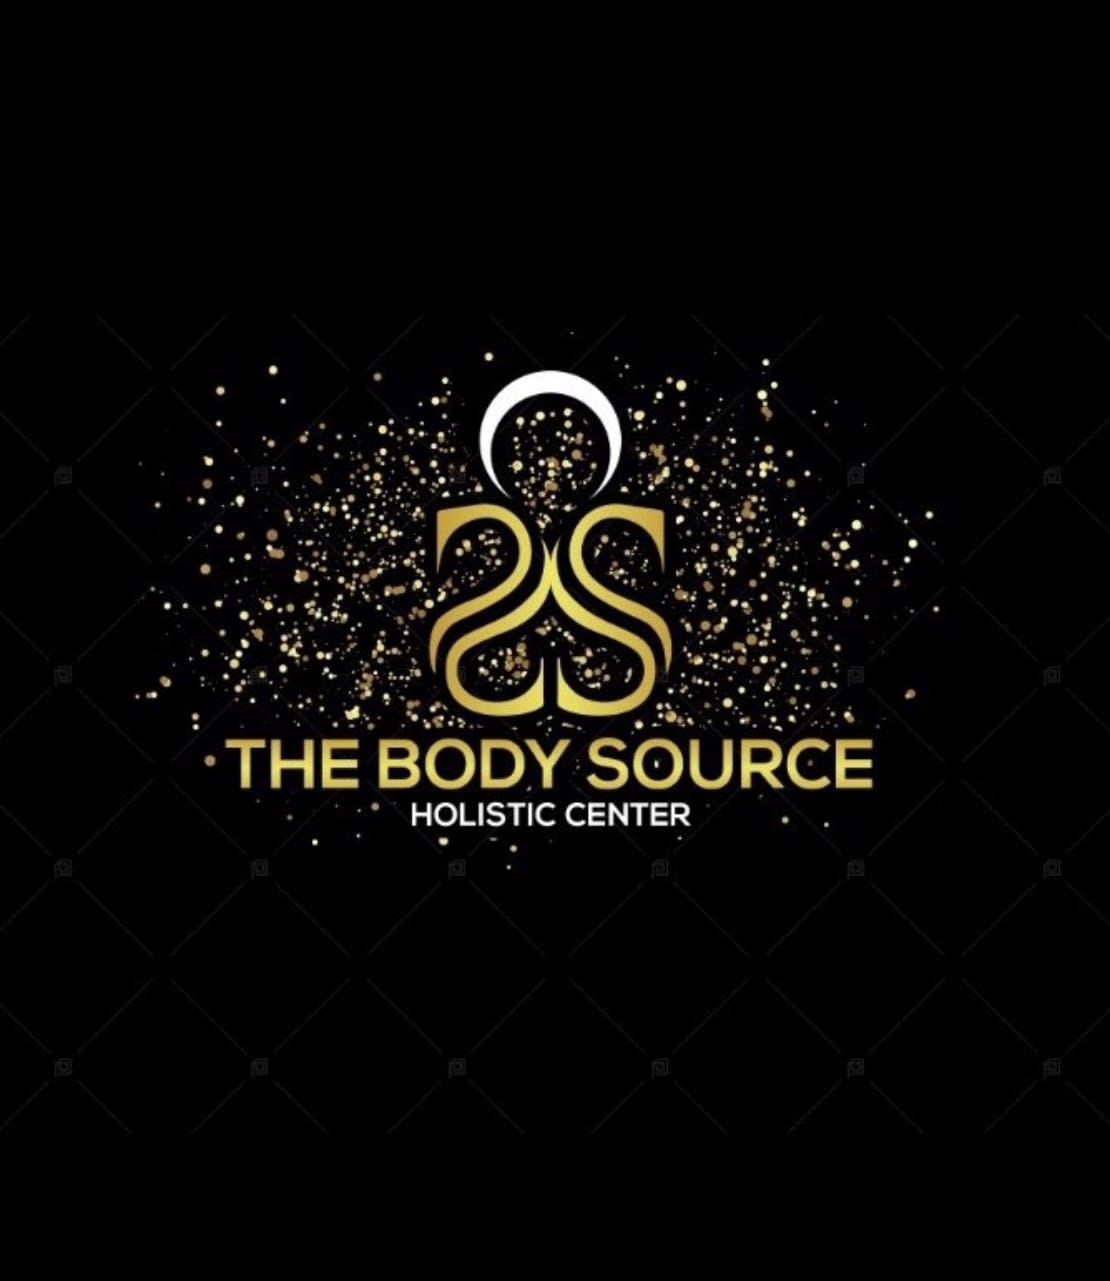 The Body Source Holistic Center